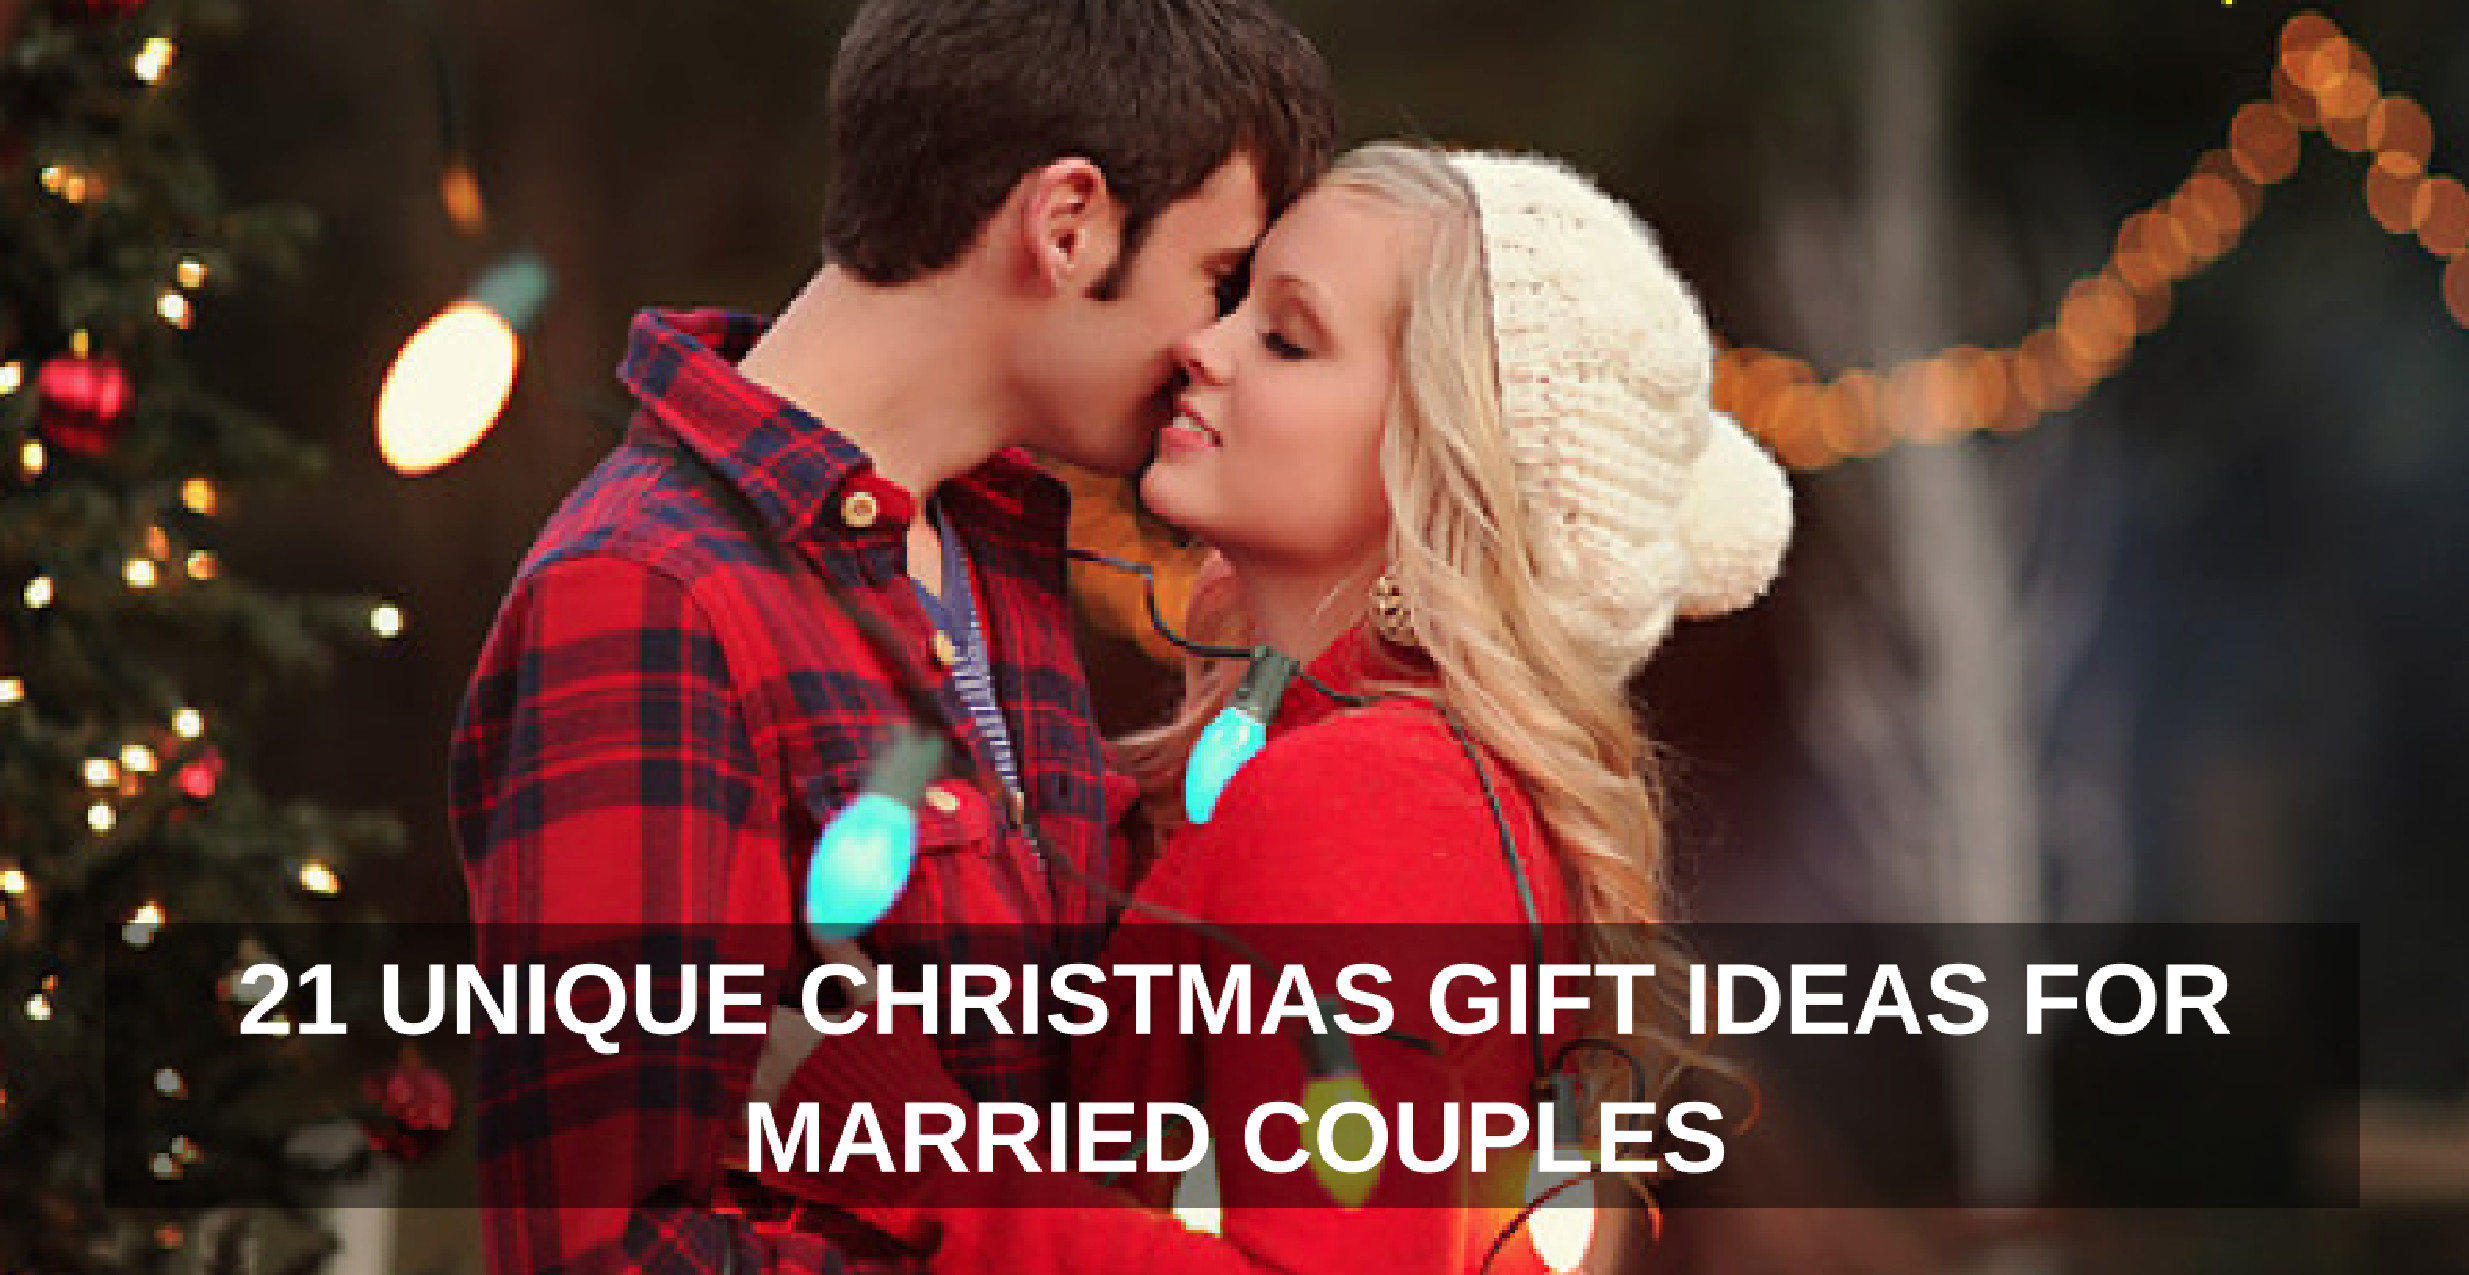 Christmas Gift Ideas For Married Couples
 21 Unique Christmas Gift Ideas for Married Couples